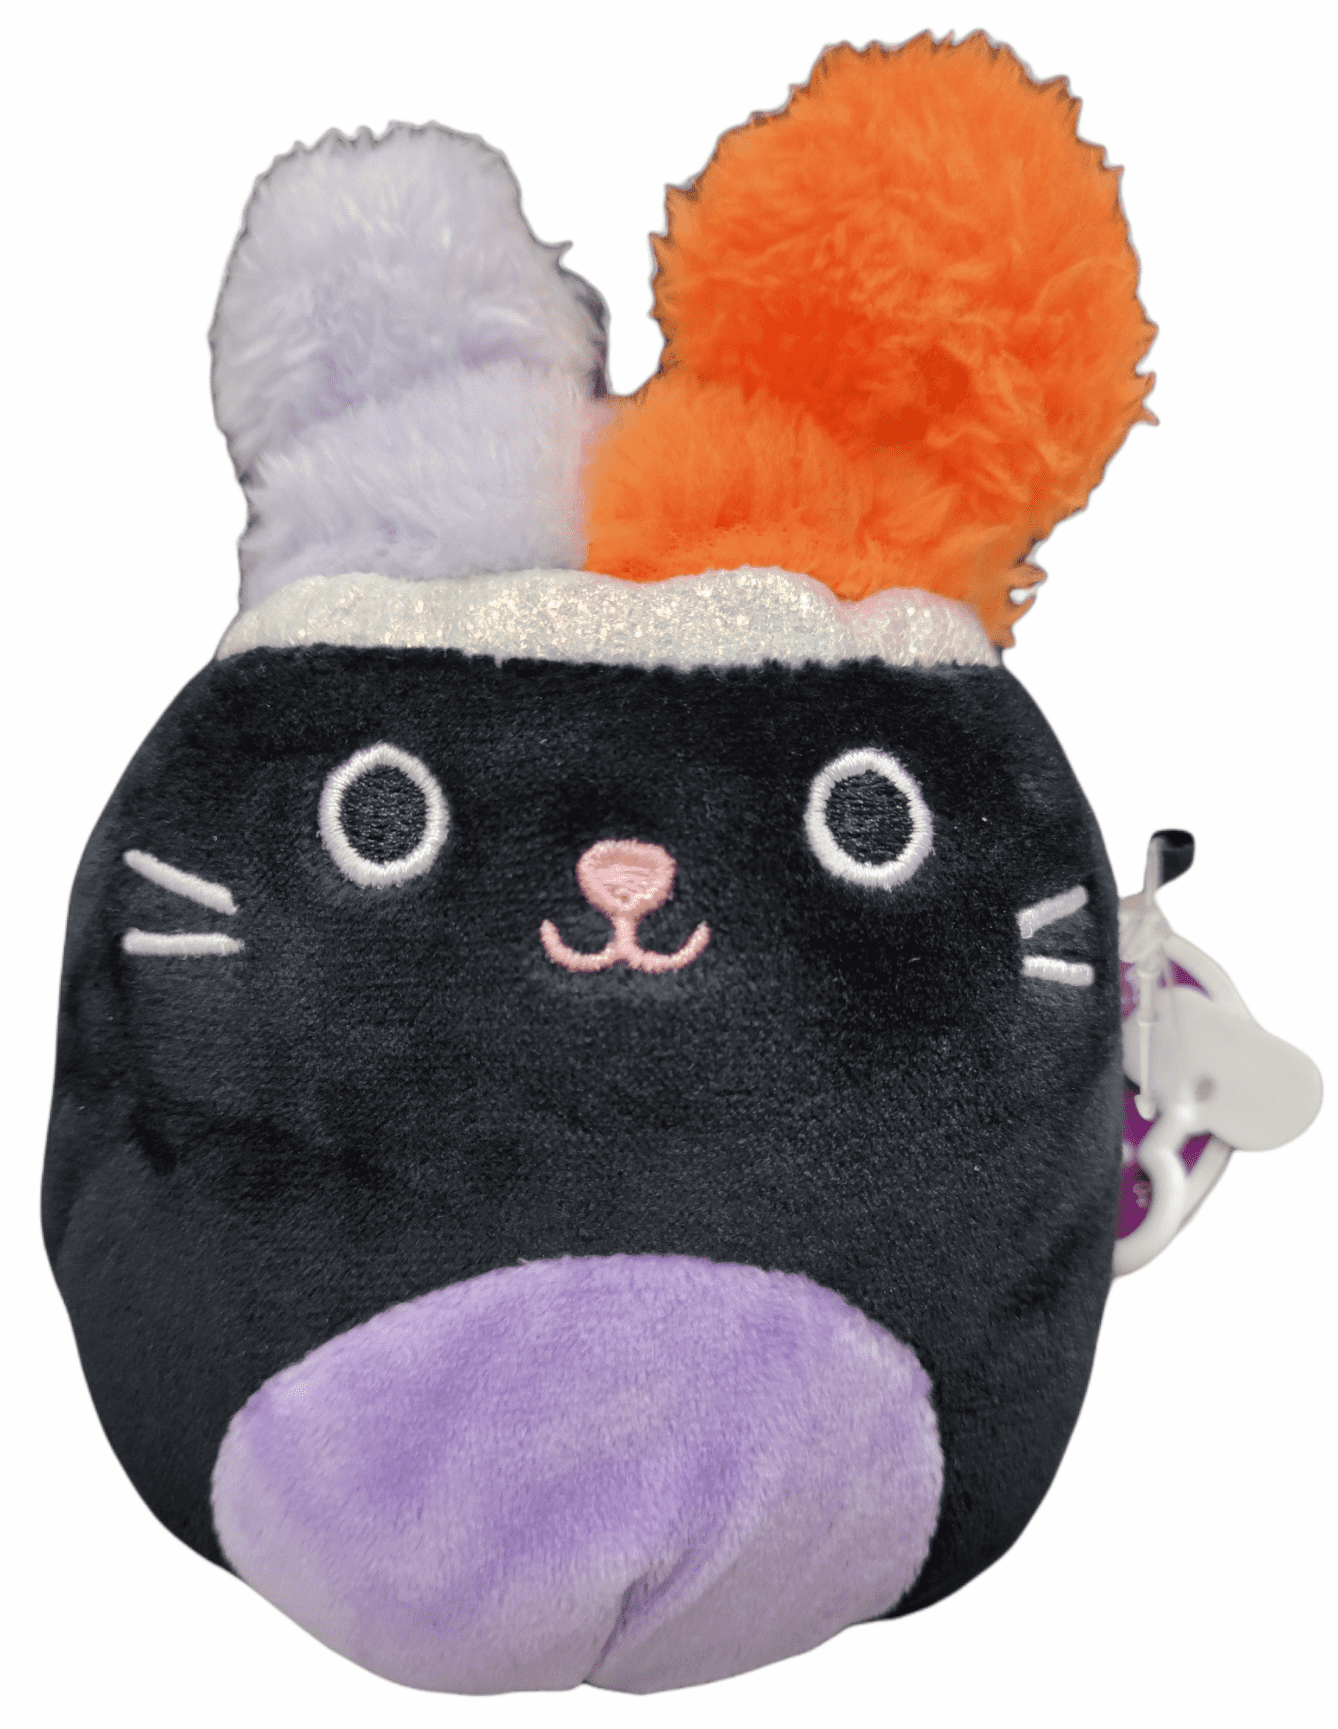 New 4.5" 2019 Squishmallows by Kellytoy Halloween Complete your set!